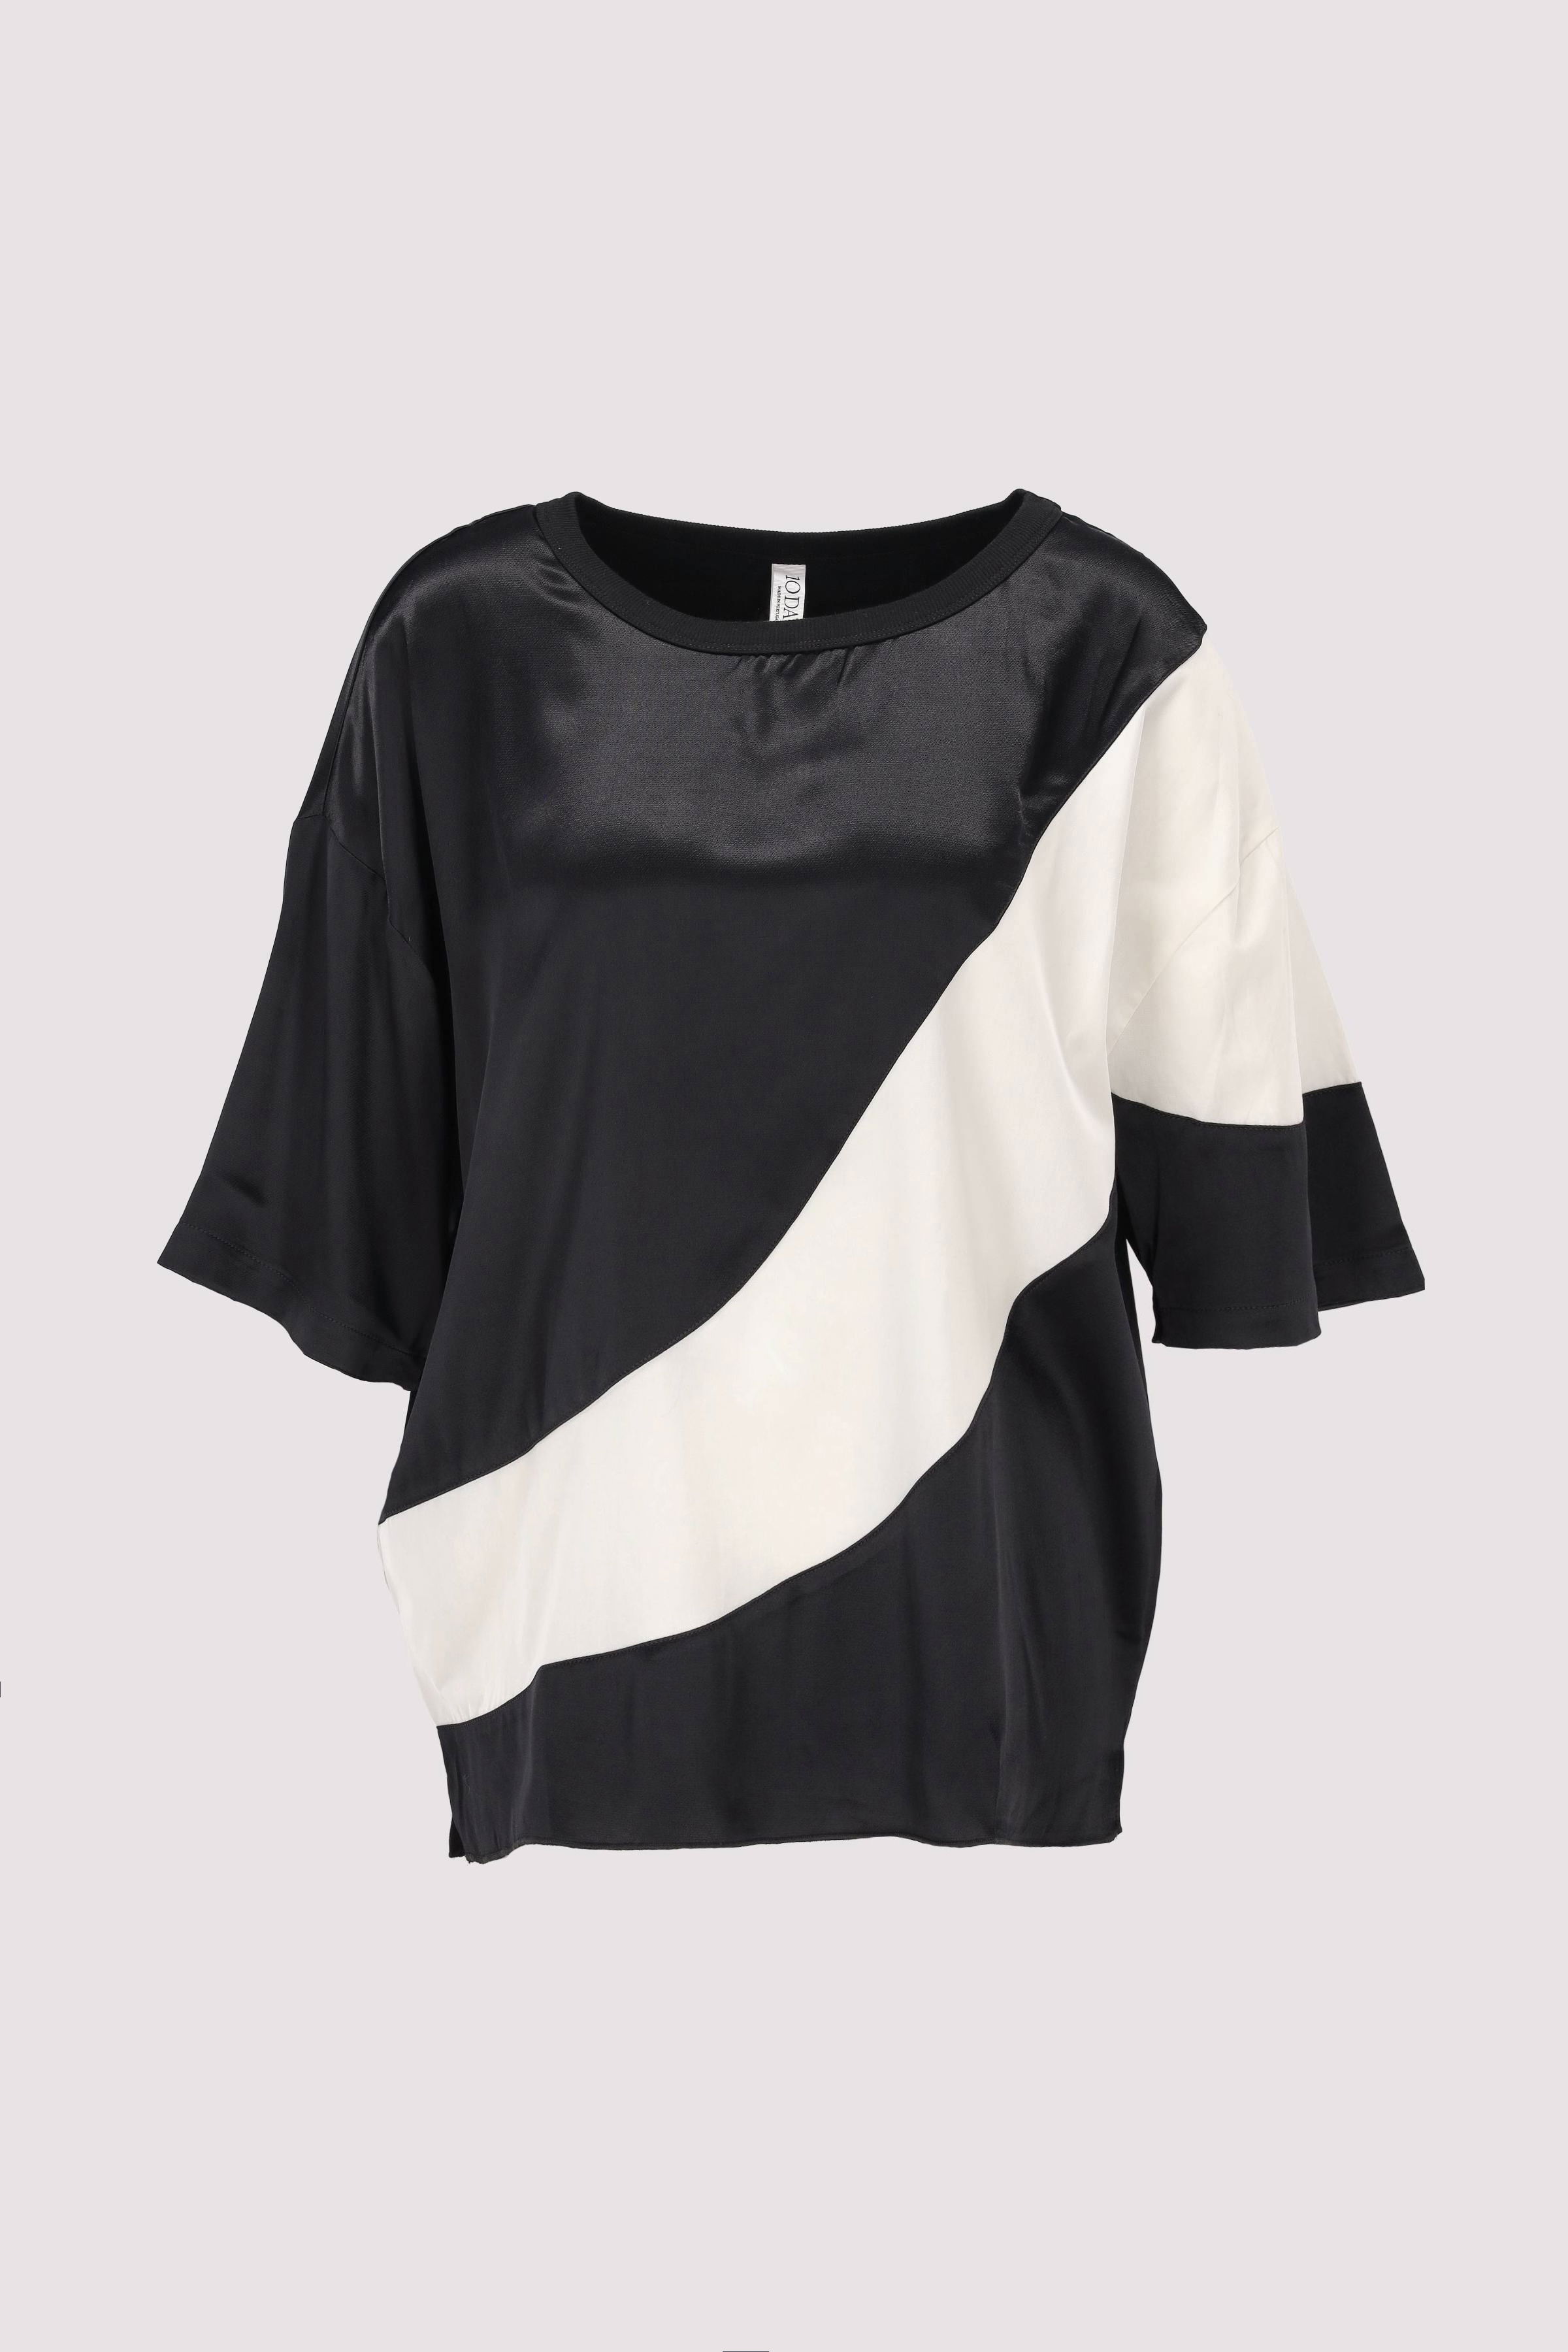 tee blouse contrast